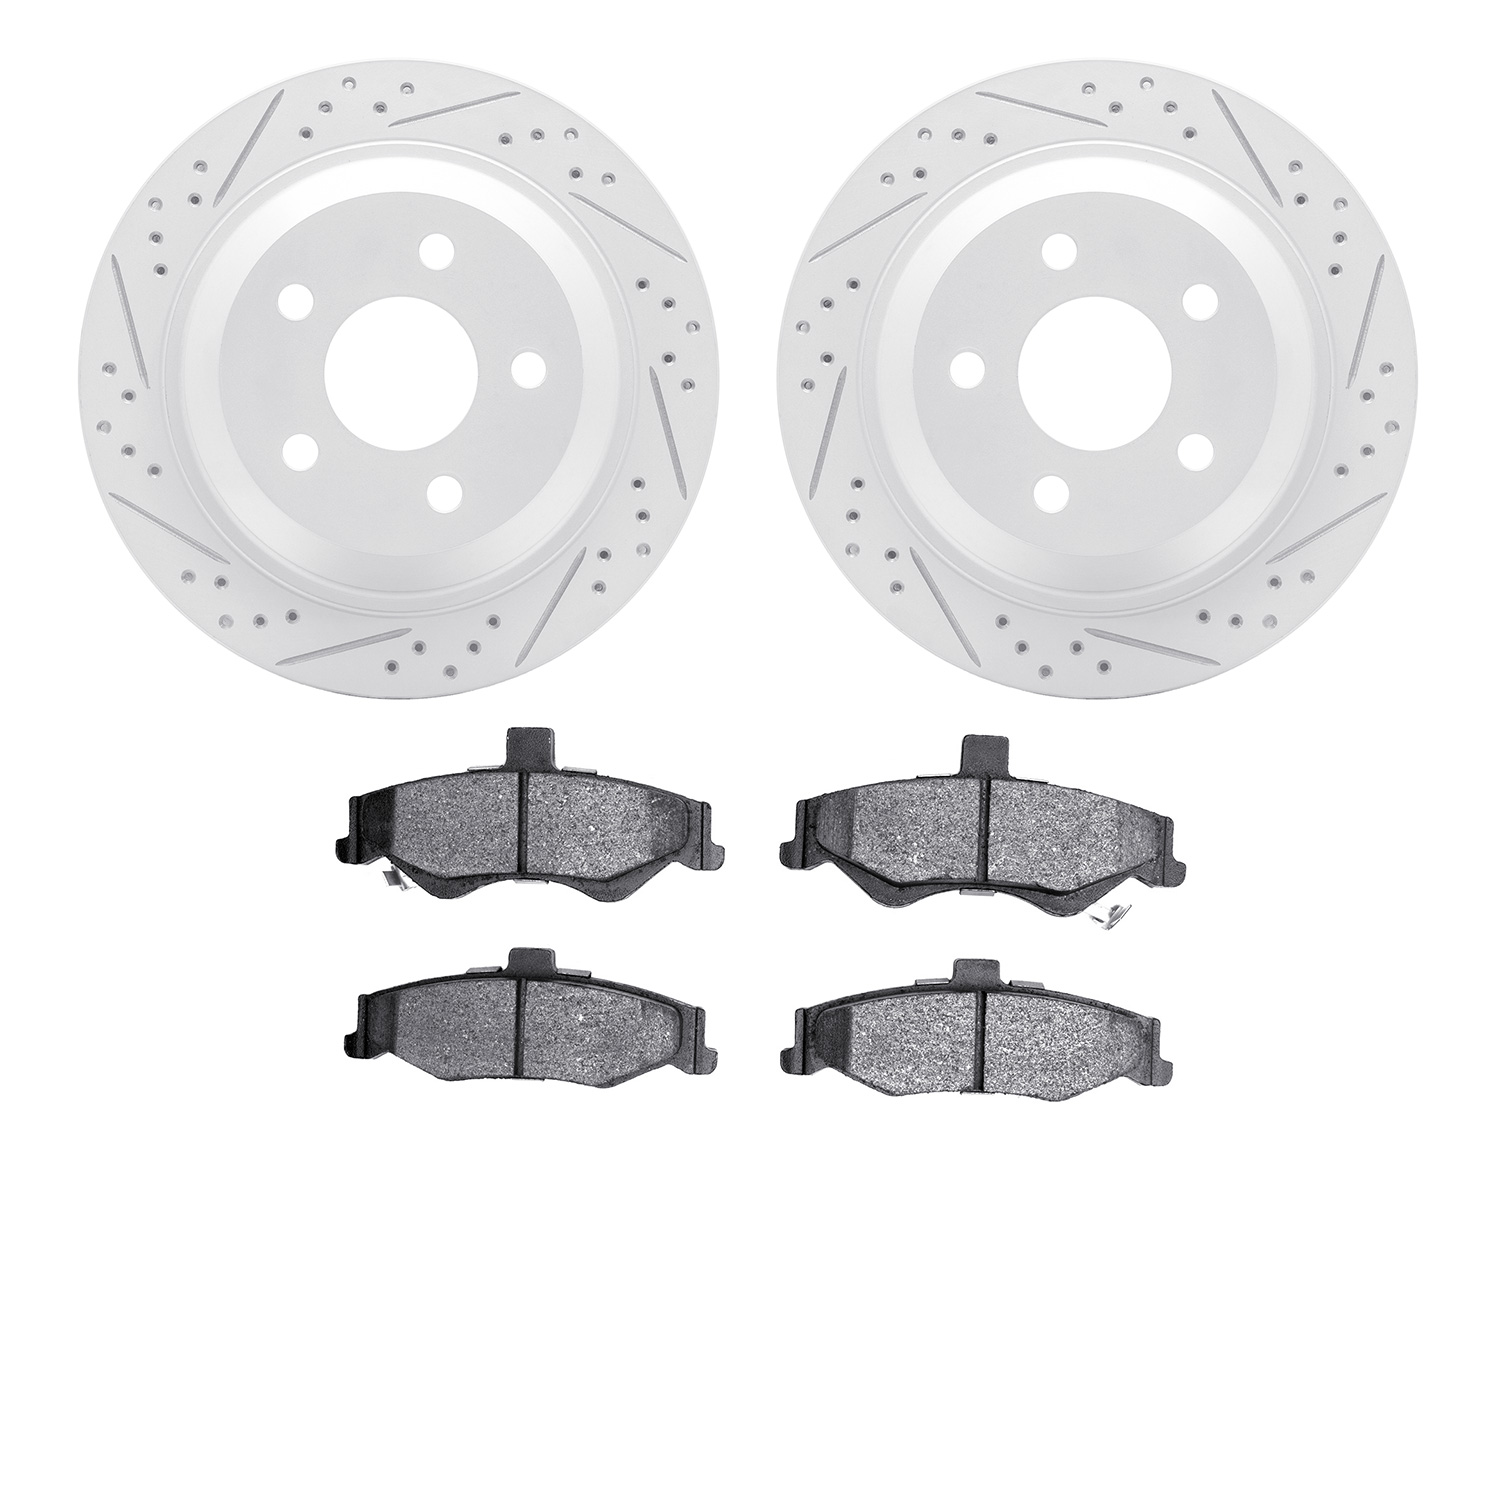 2502-52006 Geoperformance Drilled/Slotted Rotors w/5000 Advanced Brake Pads Kit, 1998-2002 GM, Position: Rear